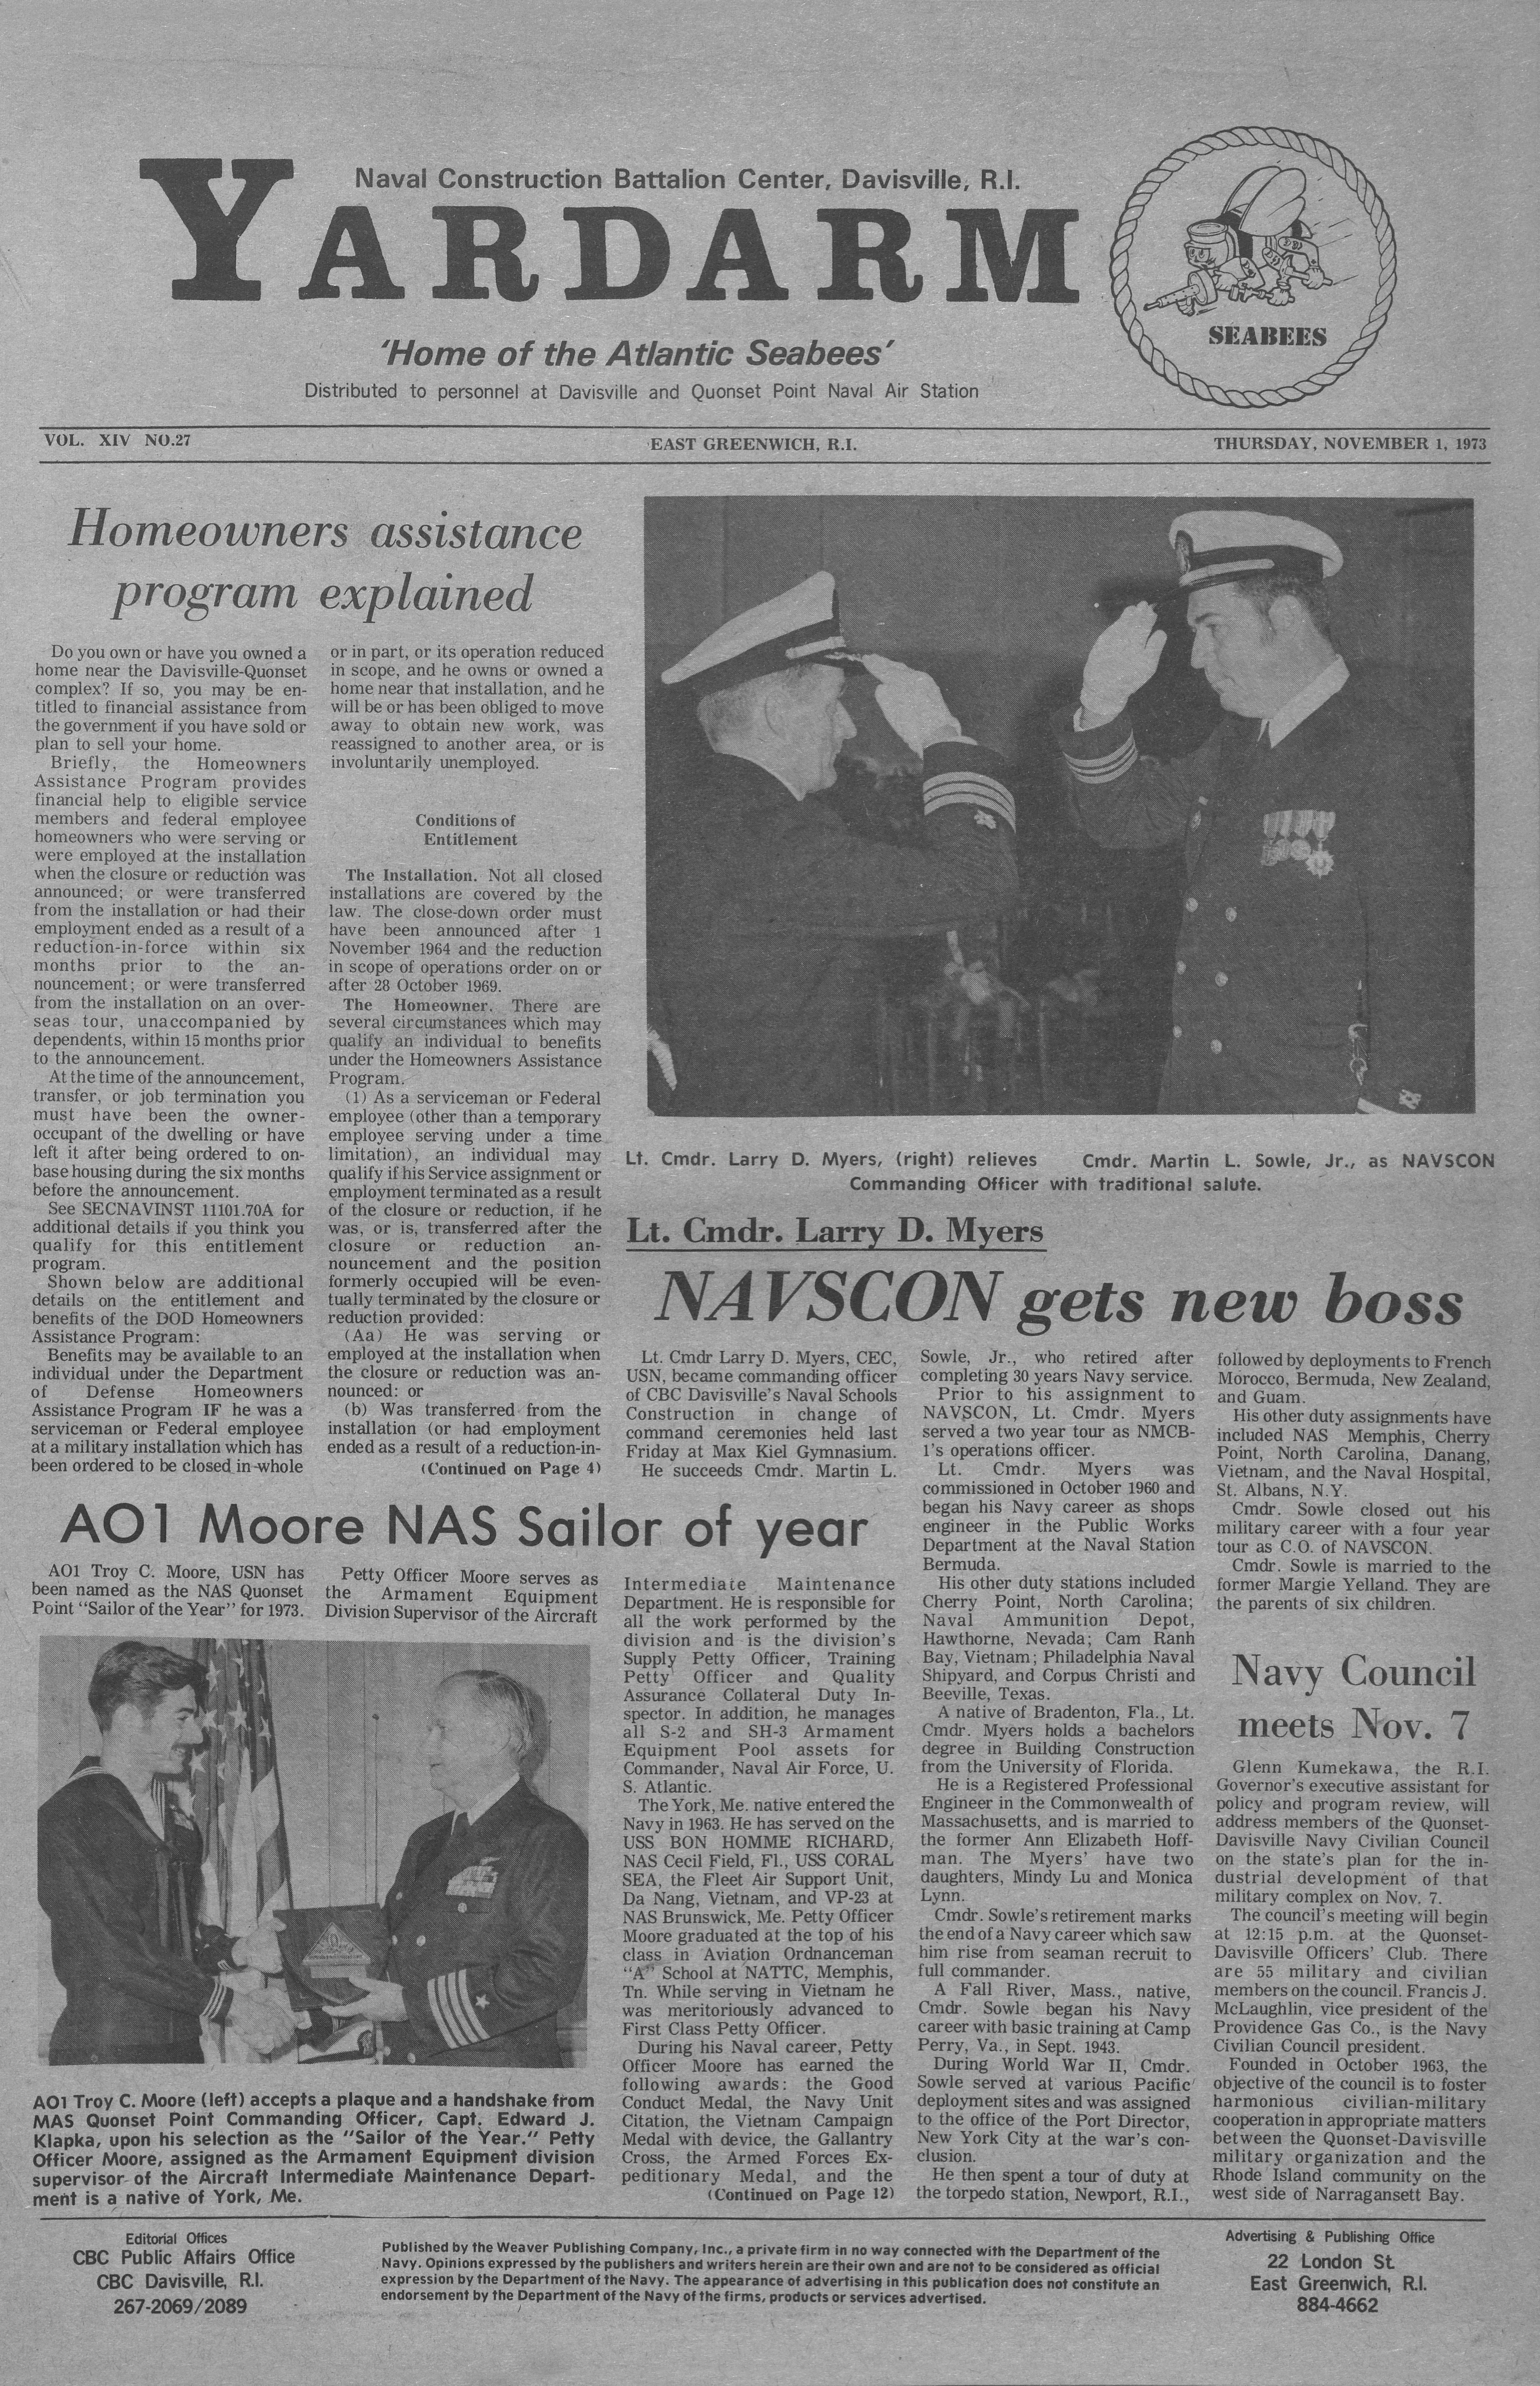 Quonset Scout, November 1, 1973, Front Page